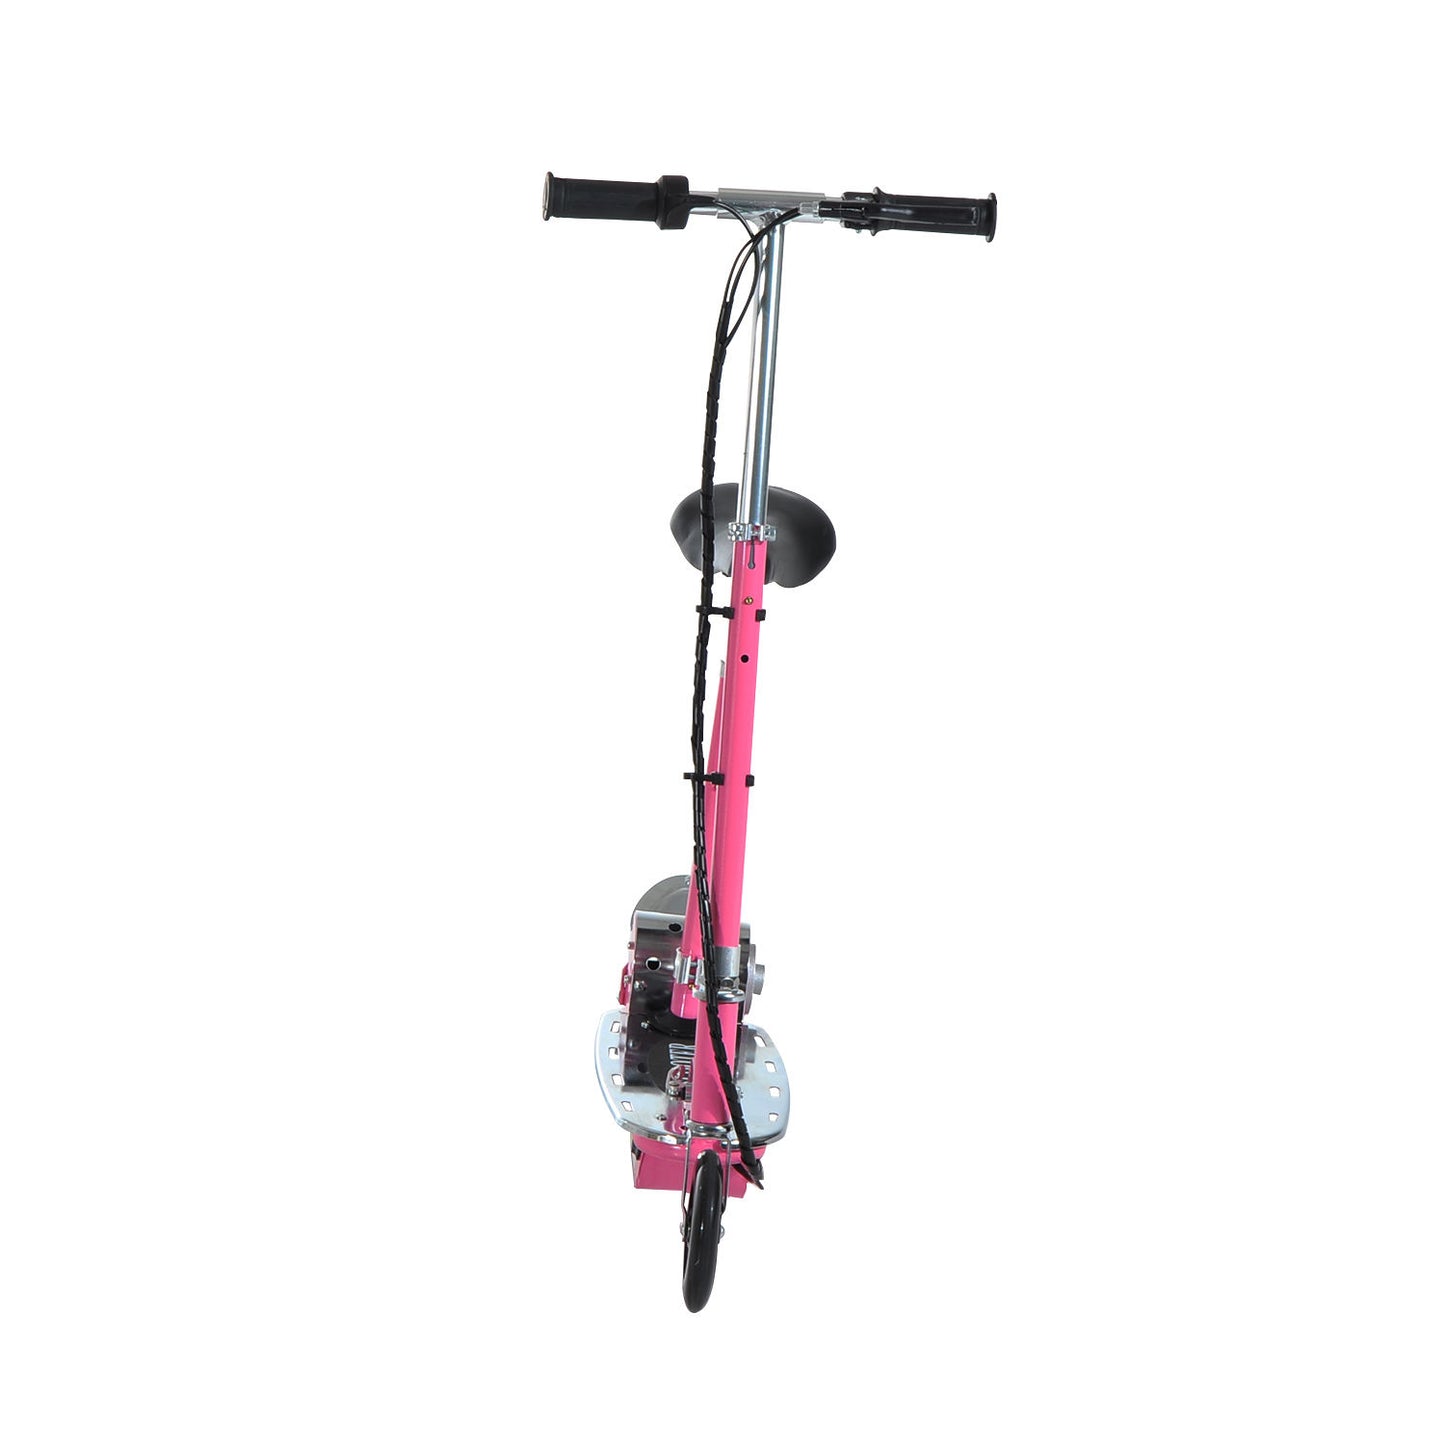 HOMCOM 12V Teens Foldable Electric Scooter With Seat, Brake Kickstand Rechargeable Battery Adjustable Ride -Pink